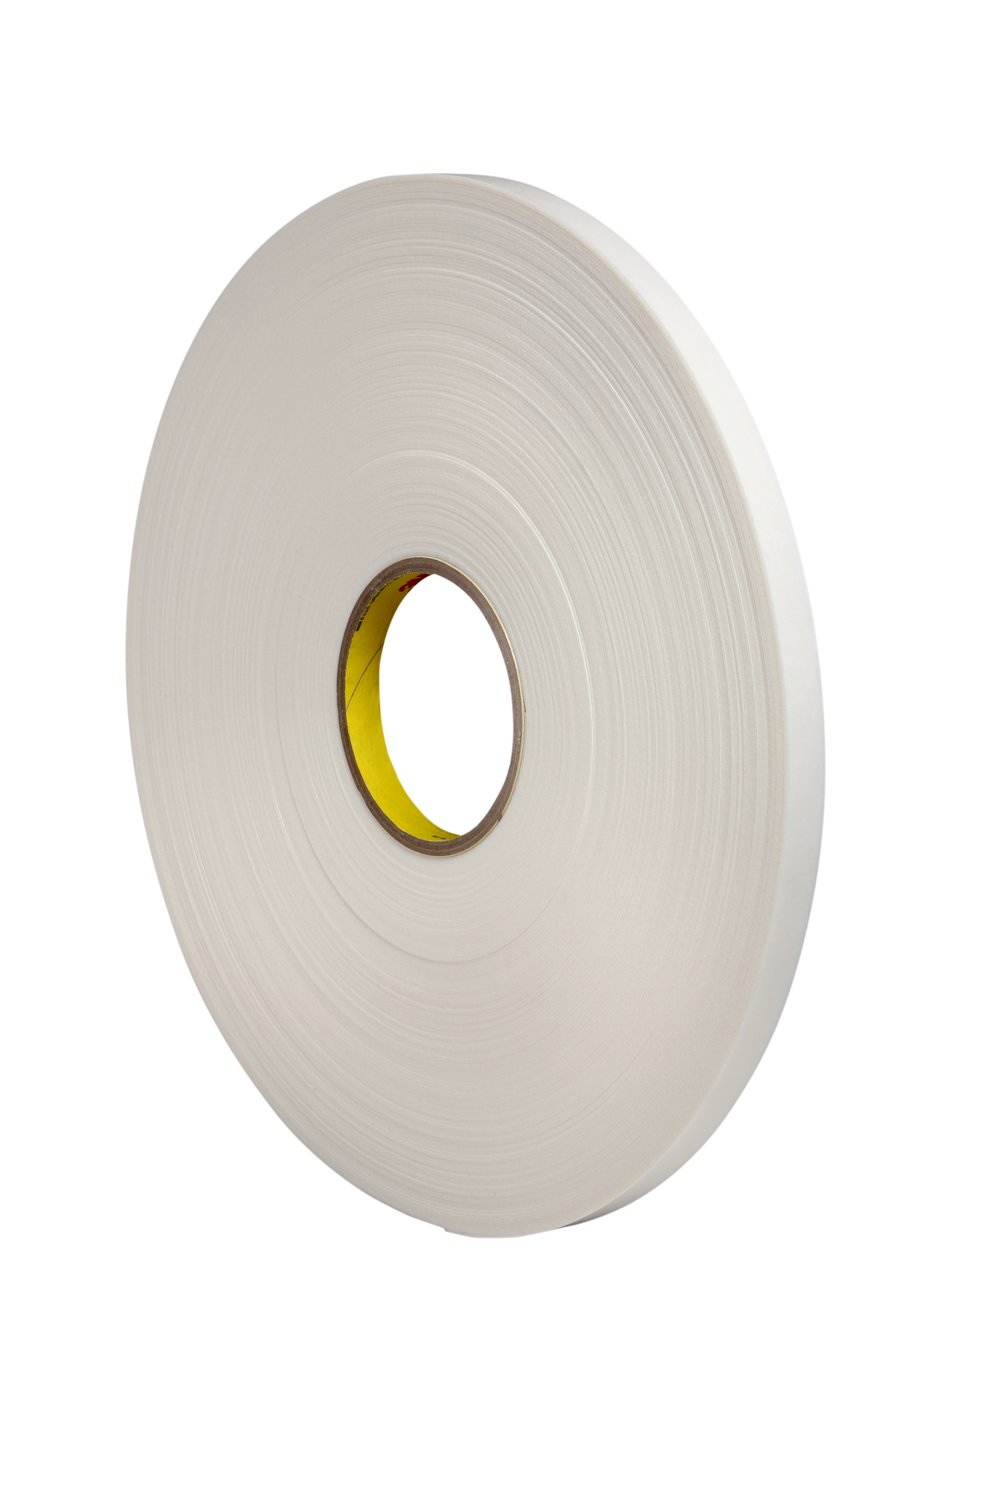 3M 5419 Low Static Polyimide Film Tape Gold 1.75 in x 36 yd Roll